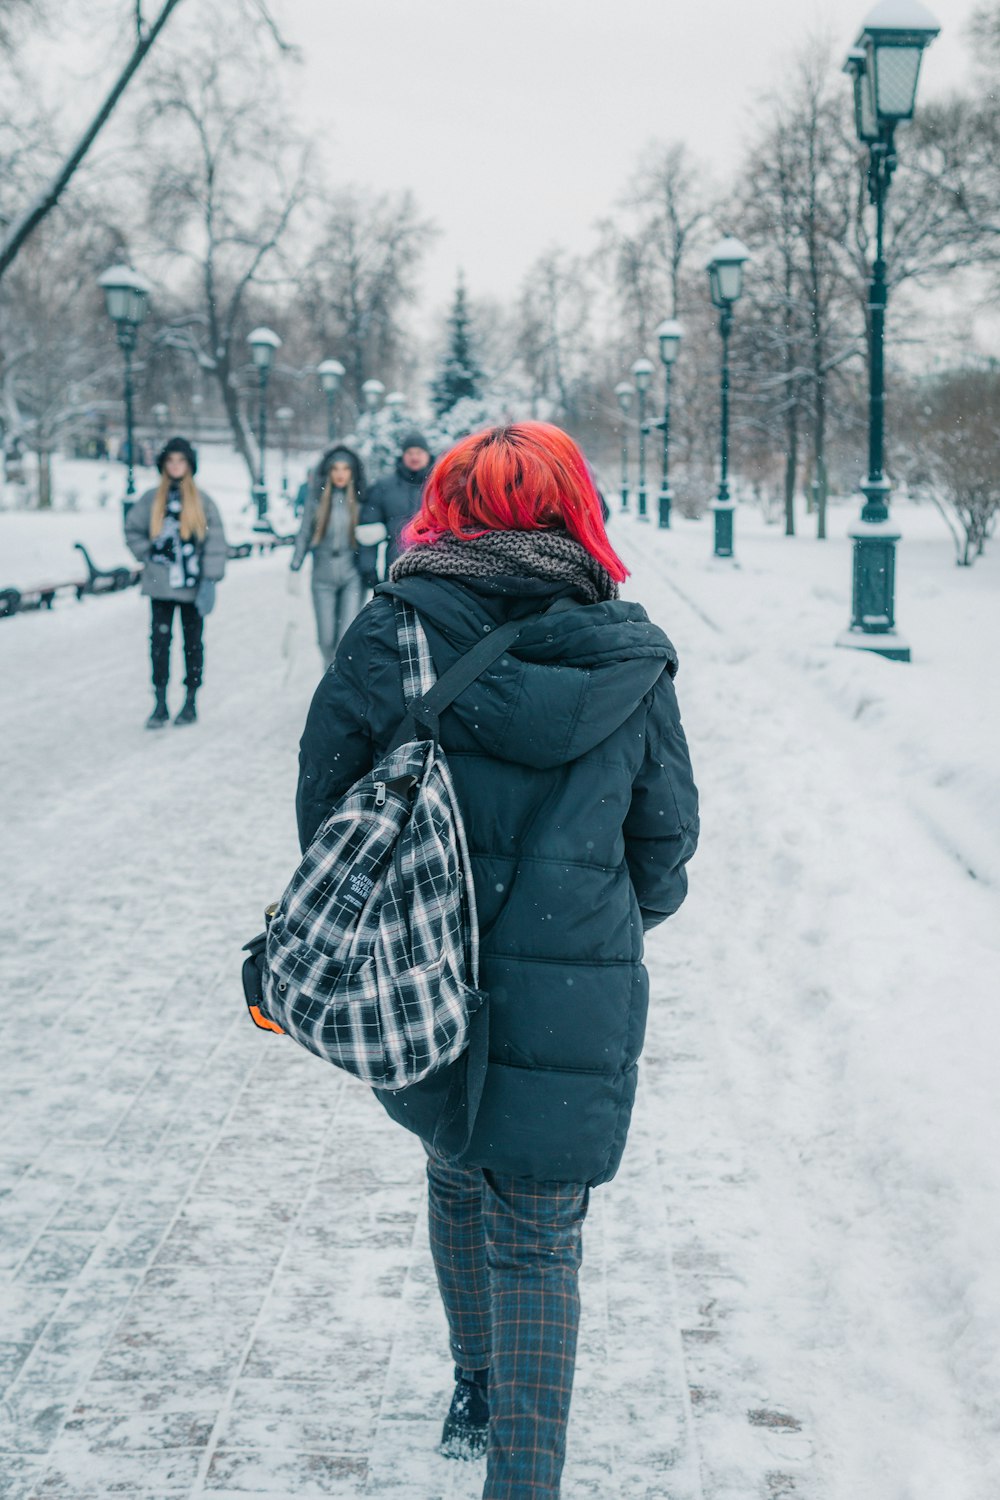 a woman with red hair walking in the snow